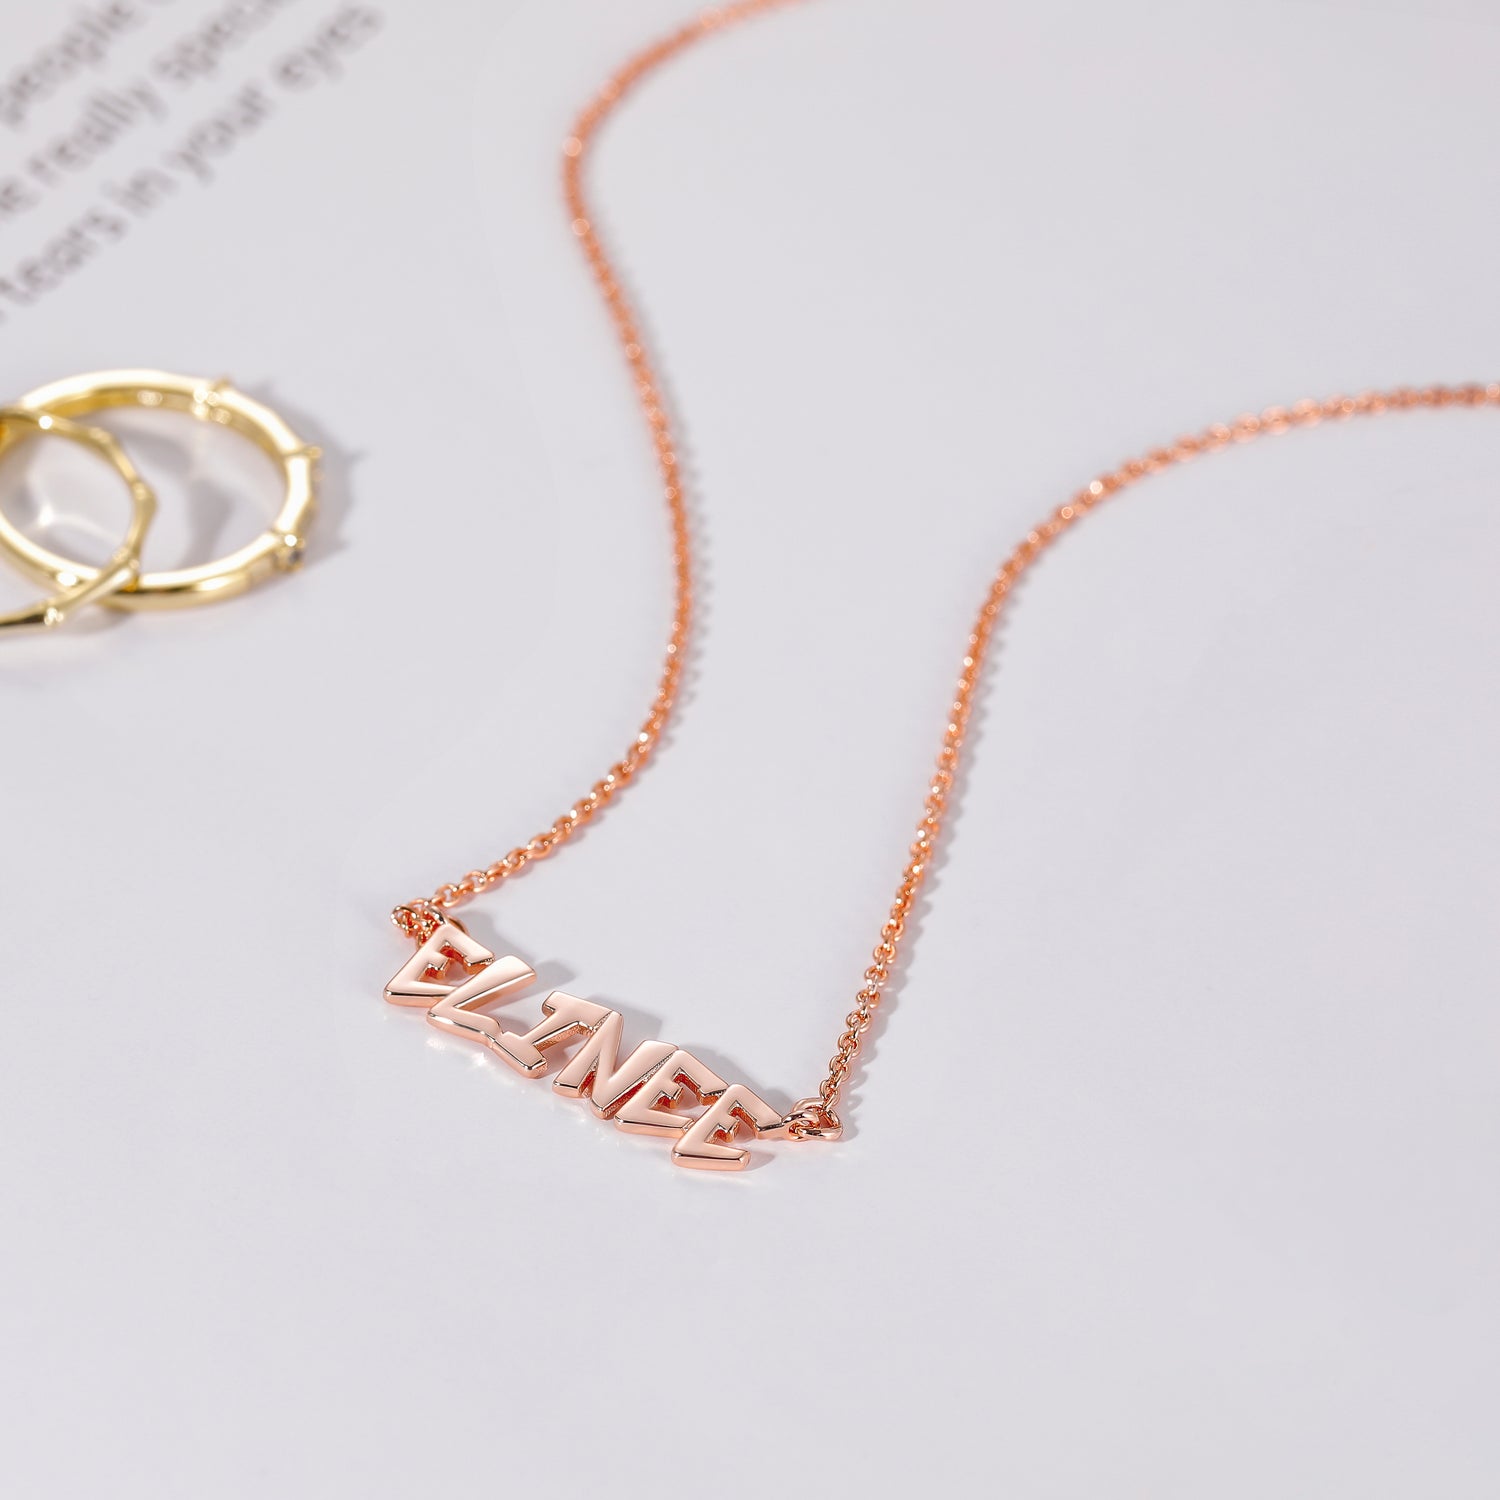 rose gold name necklace, name pendant for women, solid gold necklace